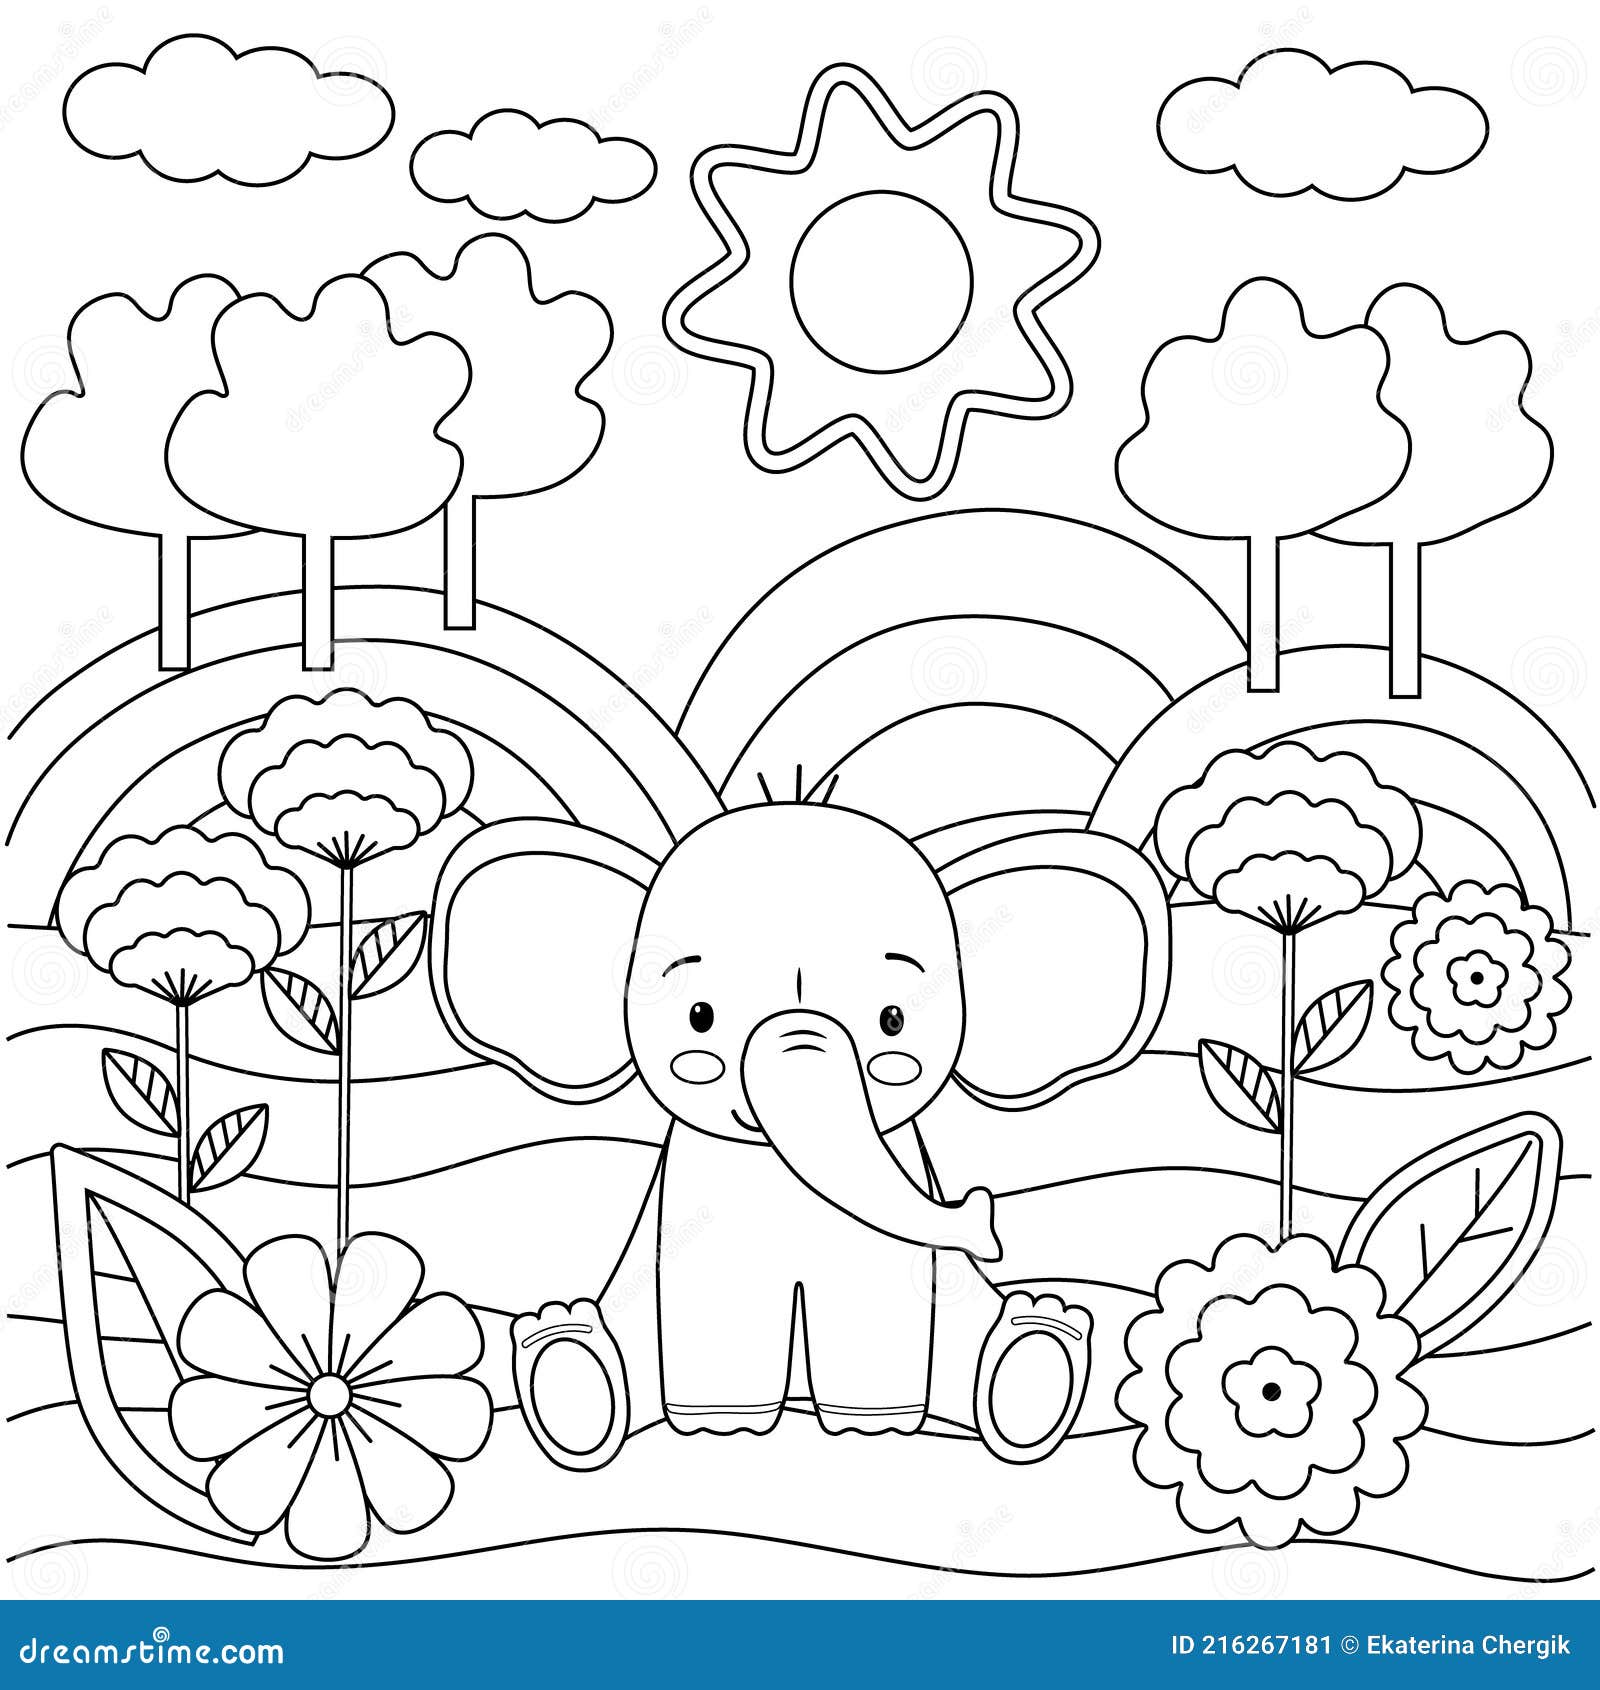 Elephant Coloring Book For Kids: Adorable Elephant Coloring Book for  Children